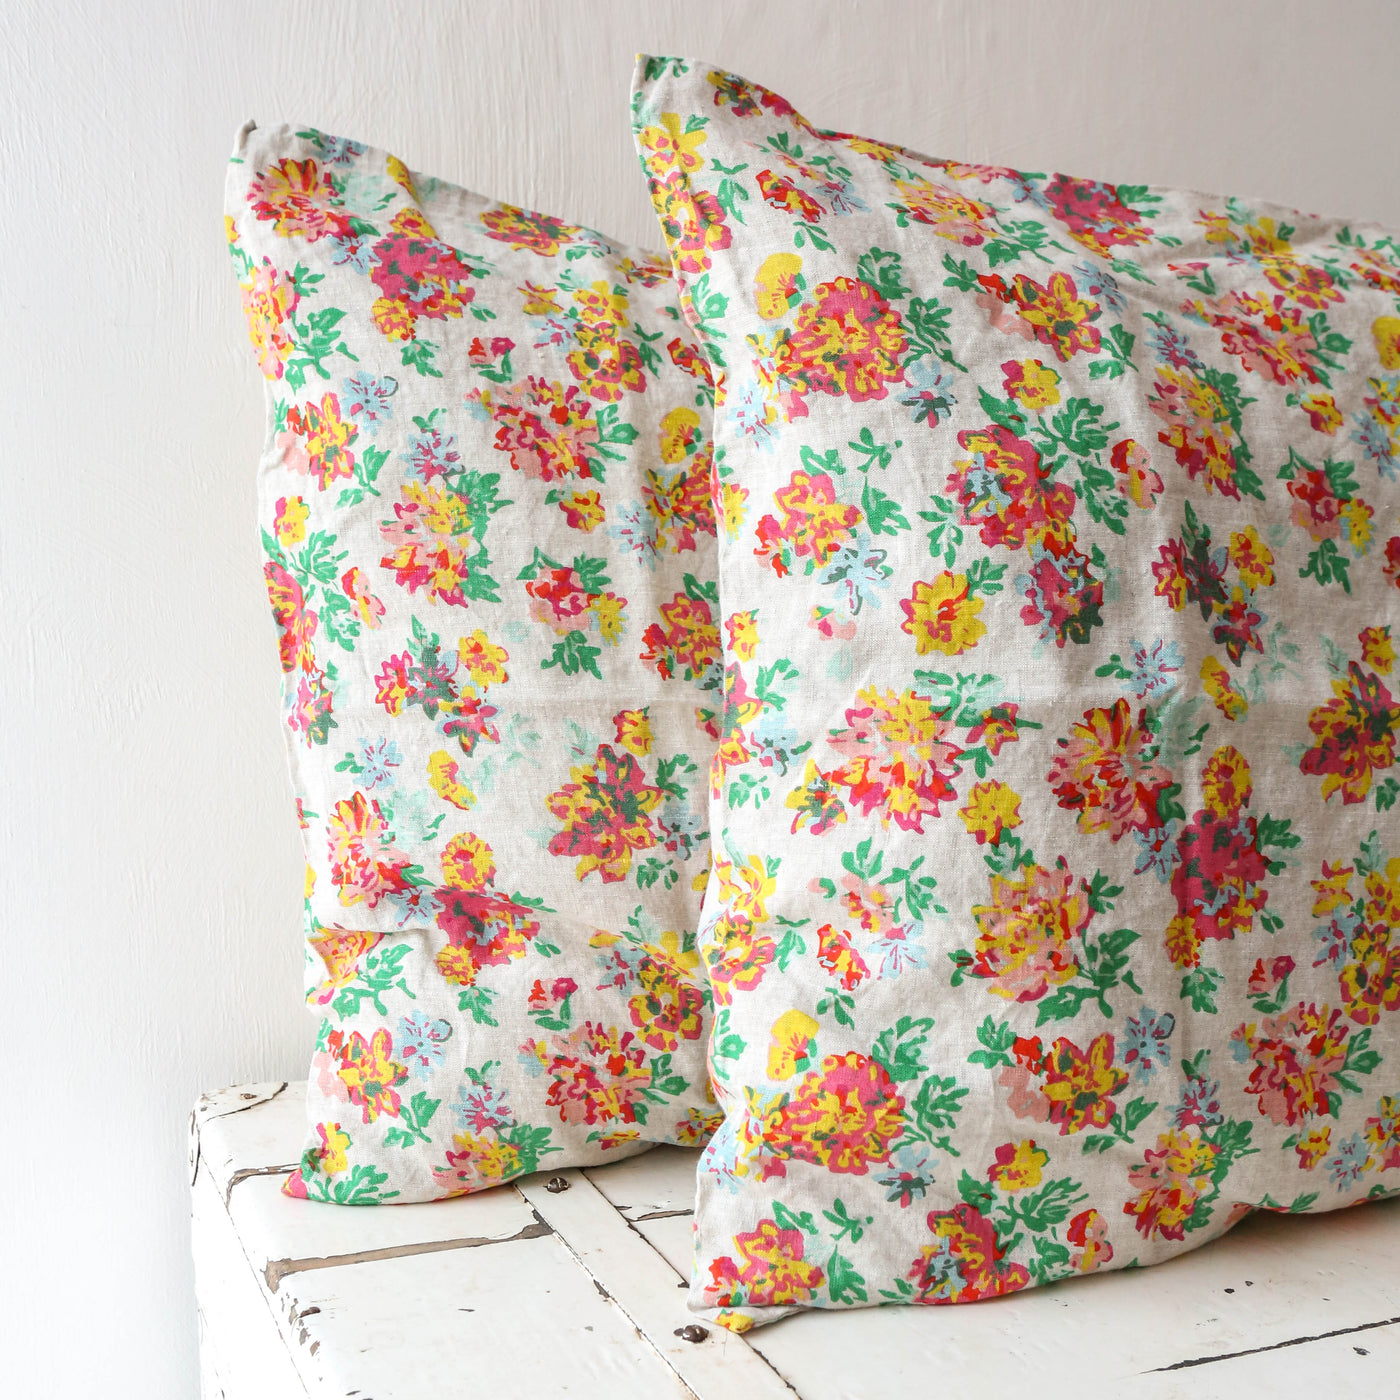 Pair of Linen Pillowcases - Wilma Floral